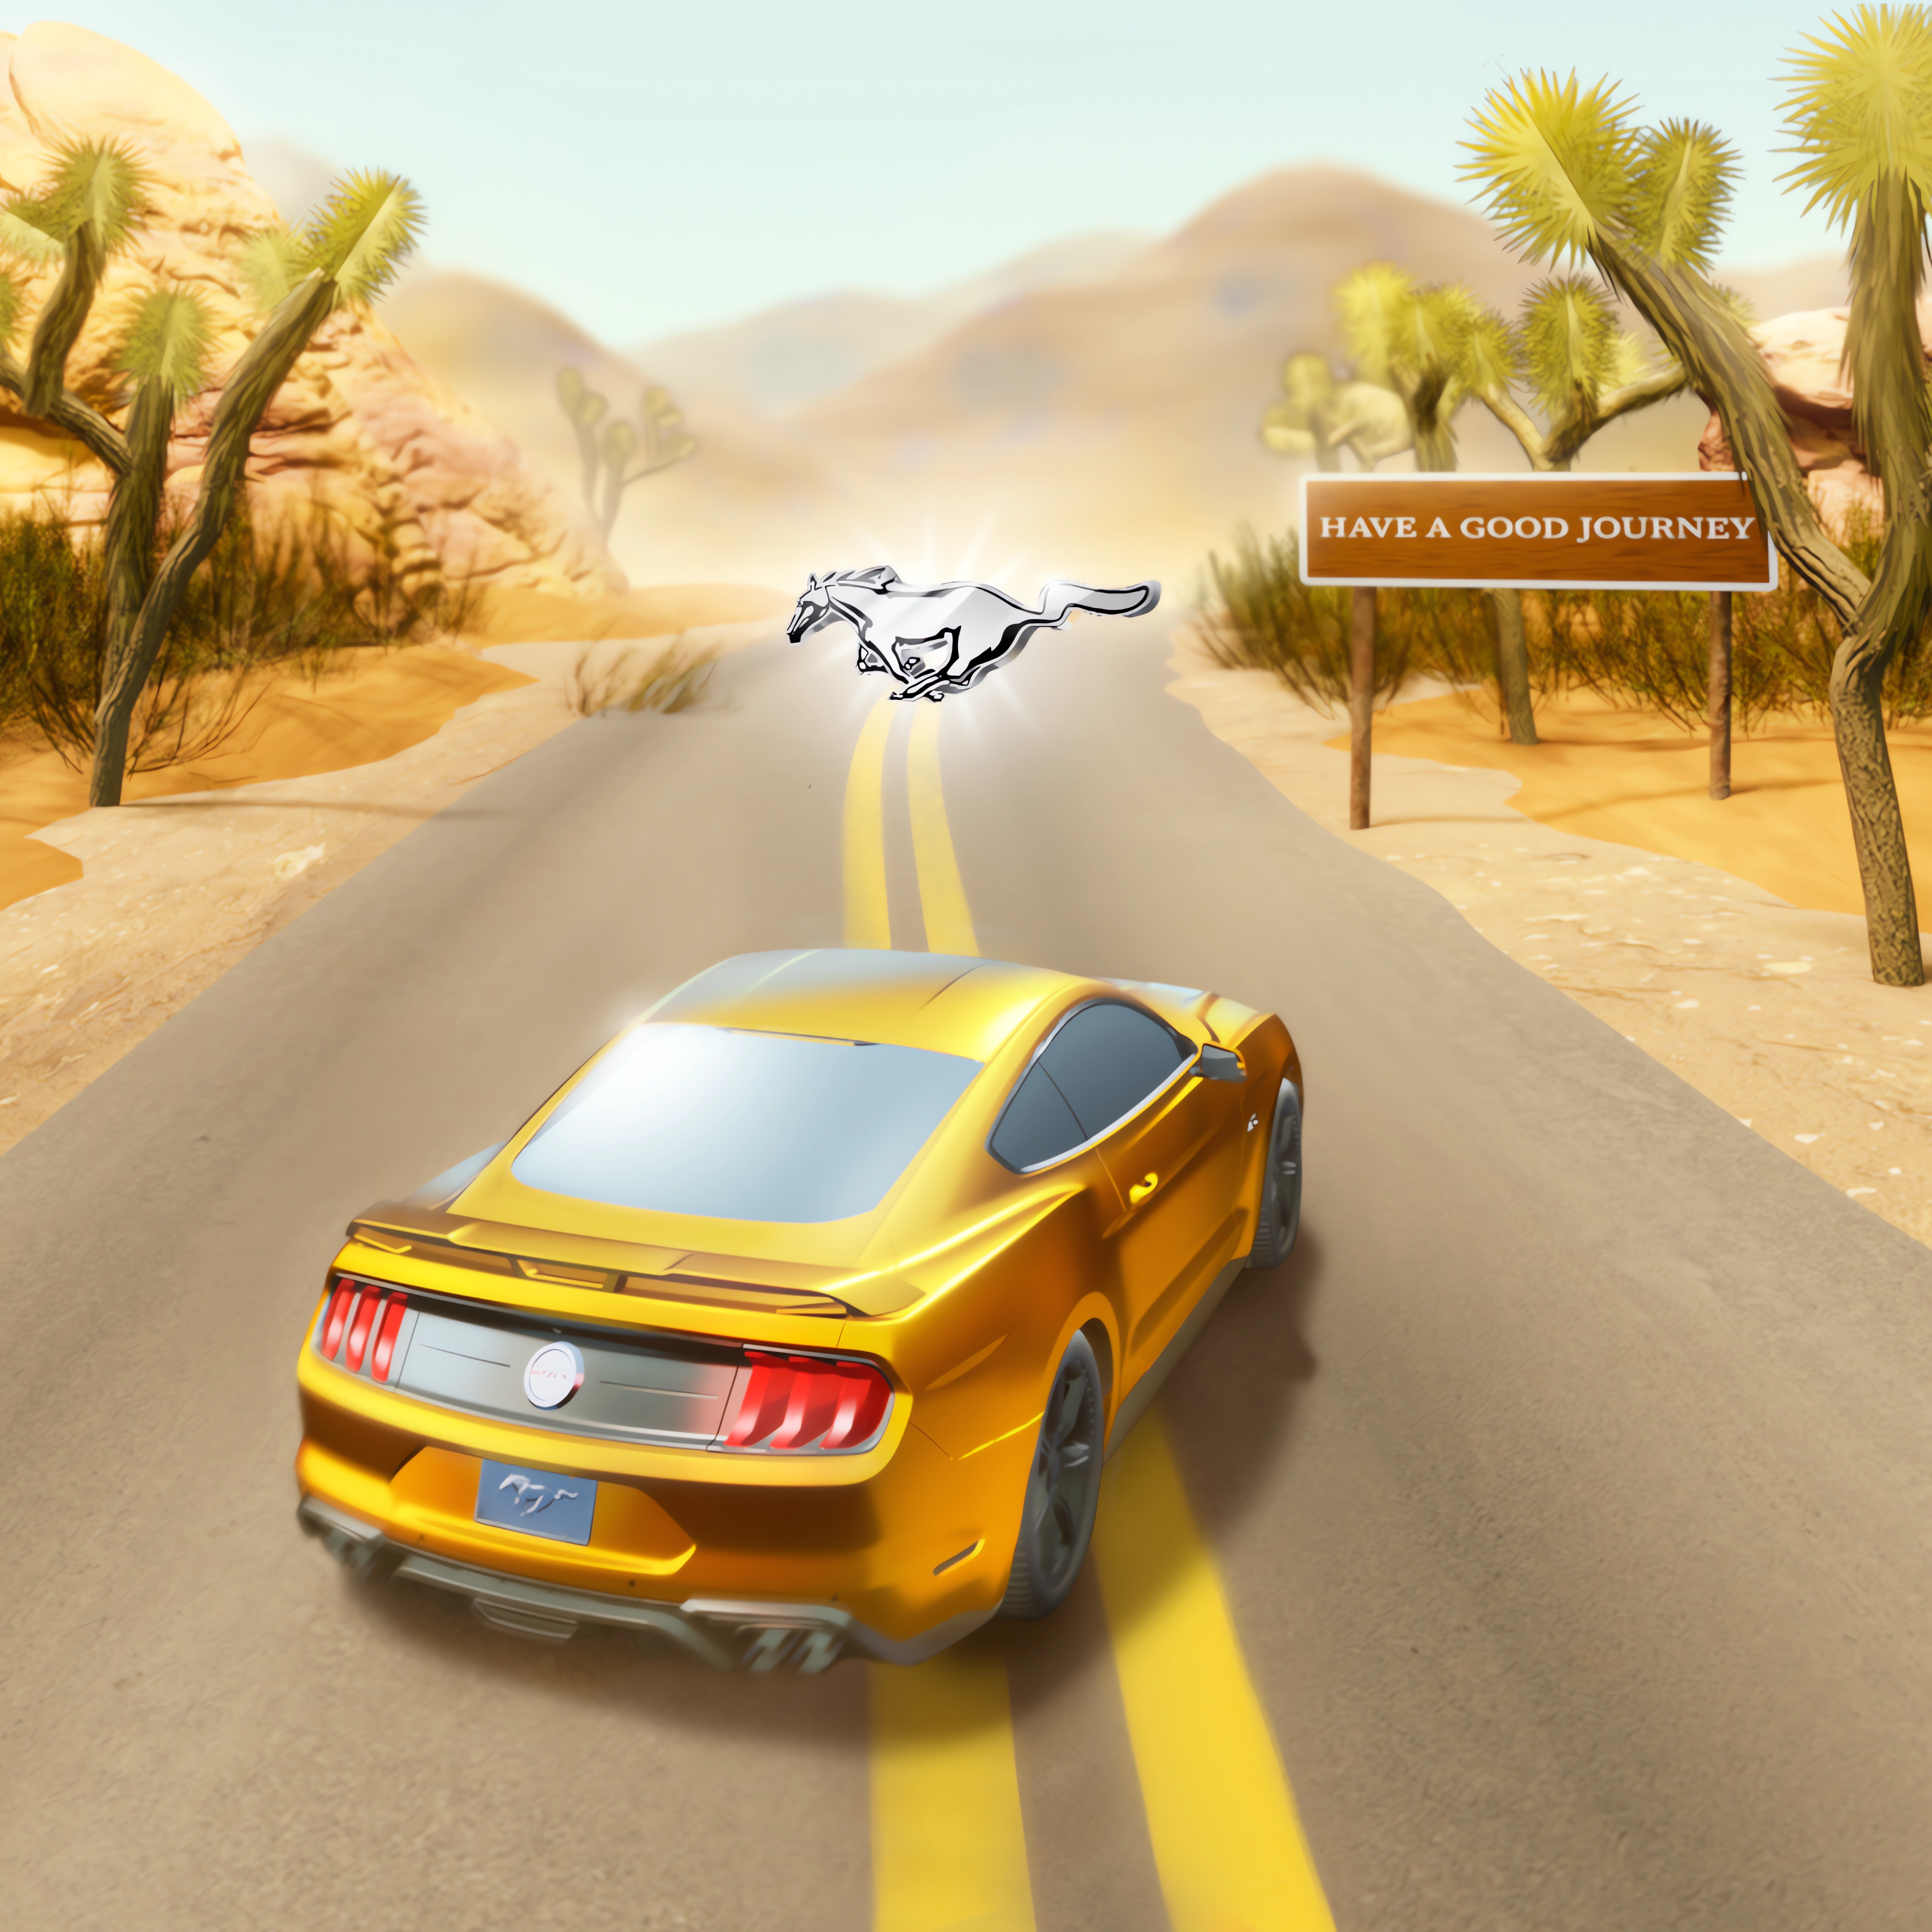 We captured the iconic California landscape, including highlights like the Pacific Highway, California Desert Road, and Yosemite National Park, and wove them into the game's setting designs. This immersive AR experience allowed users to relish their drive and the moments, fully embracing the California road trip spirit.